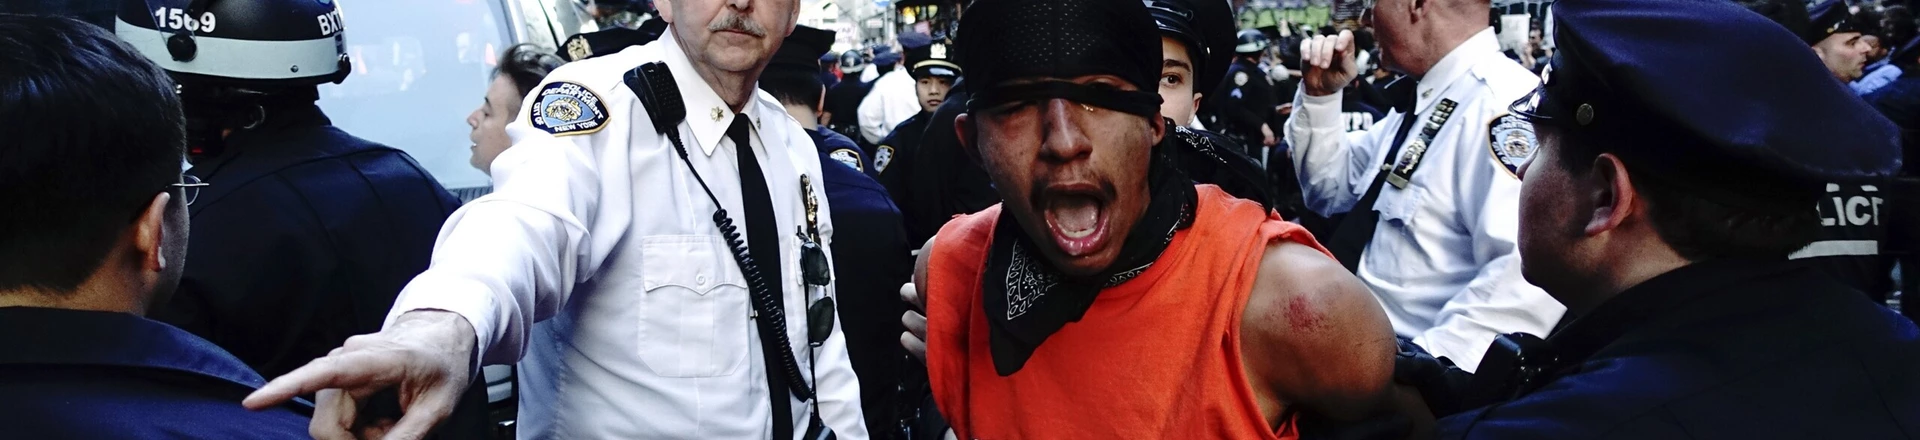 A demonstrator is arrested by police officers during a protest April 29, 2015 at Union Square in New York, held in solidarity with demonstrators in Baltimore, Maryland demanding justice for an African-American man who died of severe spinal injuries sustained in police custody.    AFP PHOTO/Eduardo Munoz Alvarez        (Photo credit should read EDUARDO MUNOZ ALVAREZ/AFP/Getty Images)